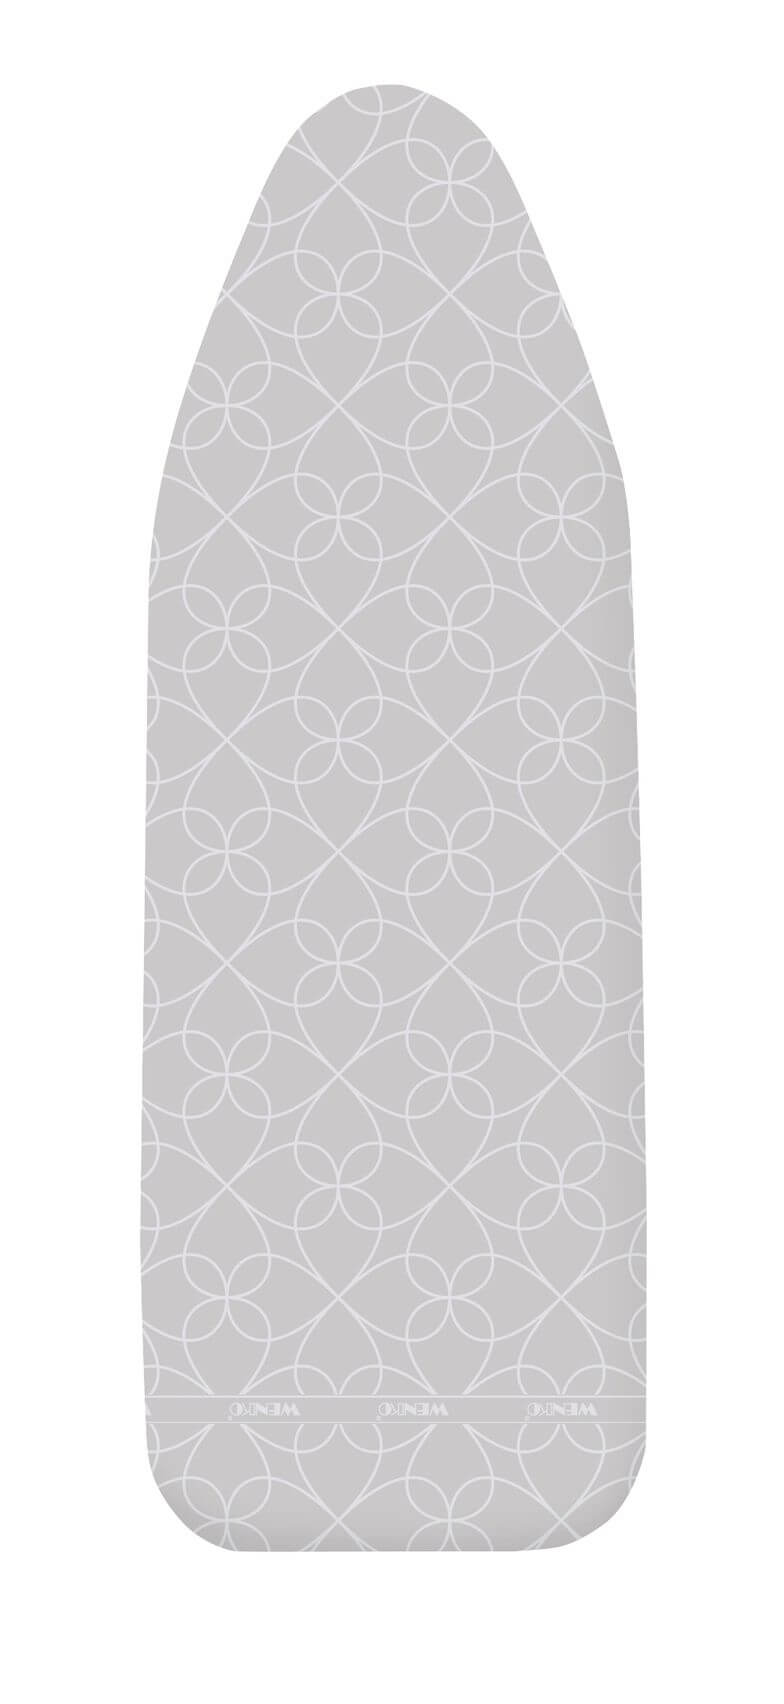 Alu Heat Reflective Ironing Board Cover Extra Large - LAUNDRY - Ironing Board Covers - Soko and Co